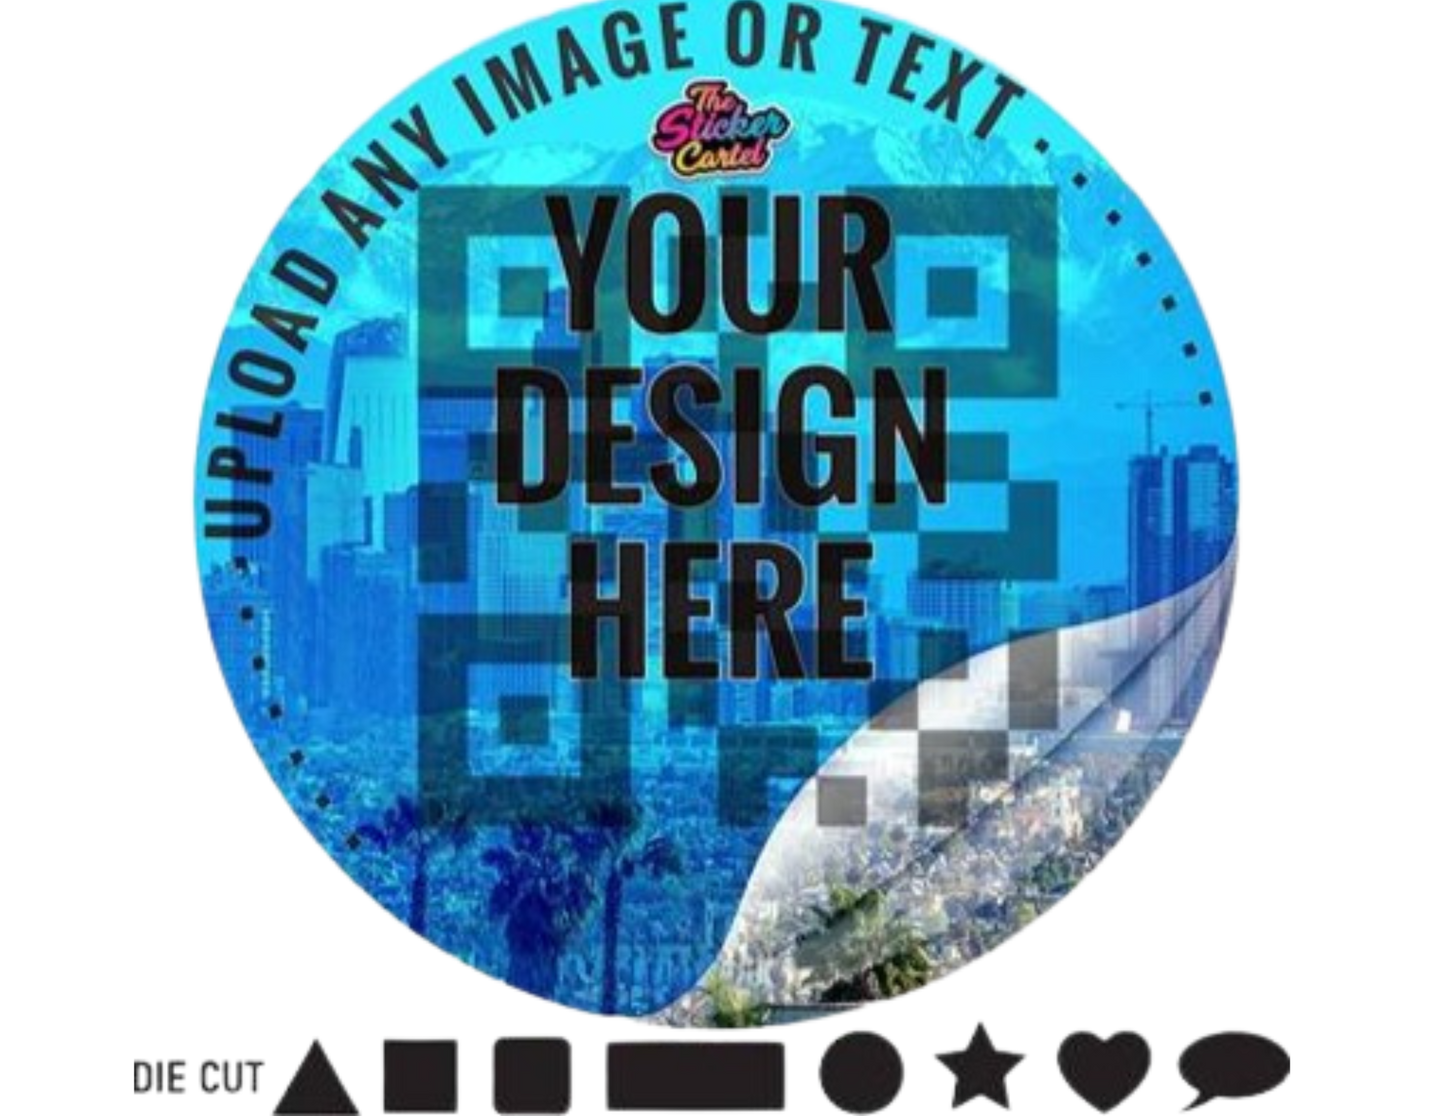 *NEW* Custom QR CODE Sticker Cartel Labels | Your Custom Personalized QR CODE Label Stickers | Insert Text Name Image and Photo | Ideal Decals for Stock and Gifts and Christmas Presents | Contains 100 Custom Labels